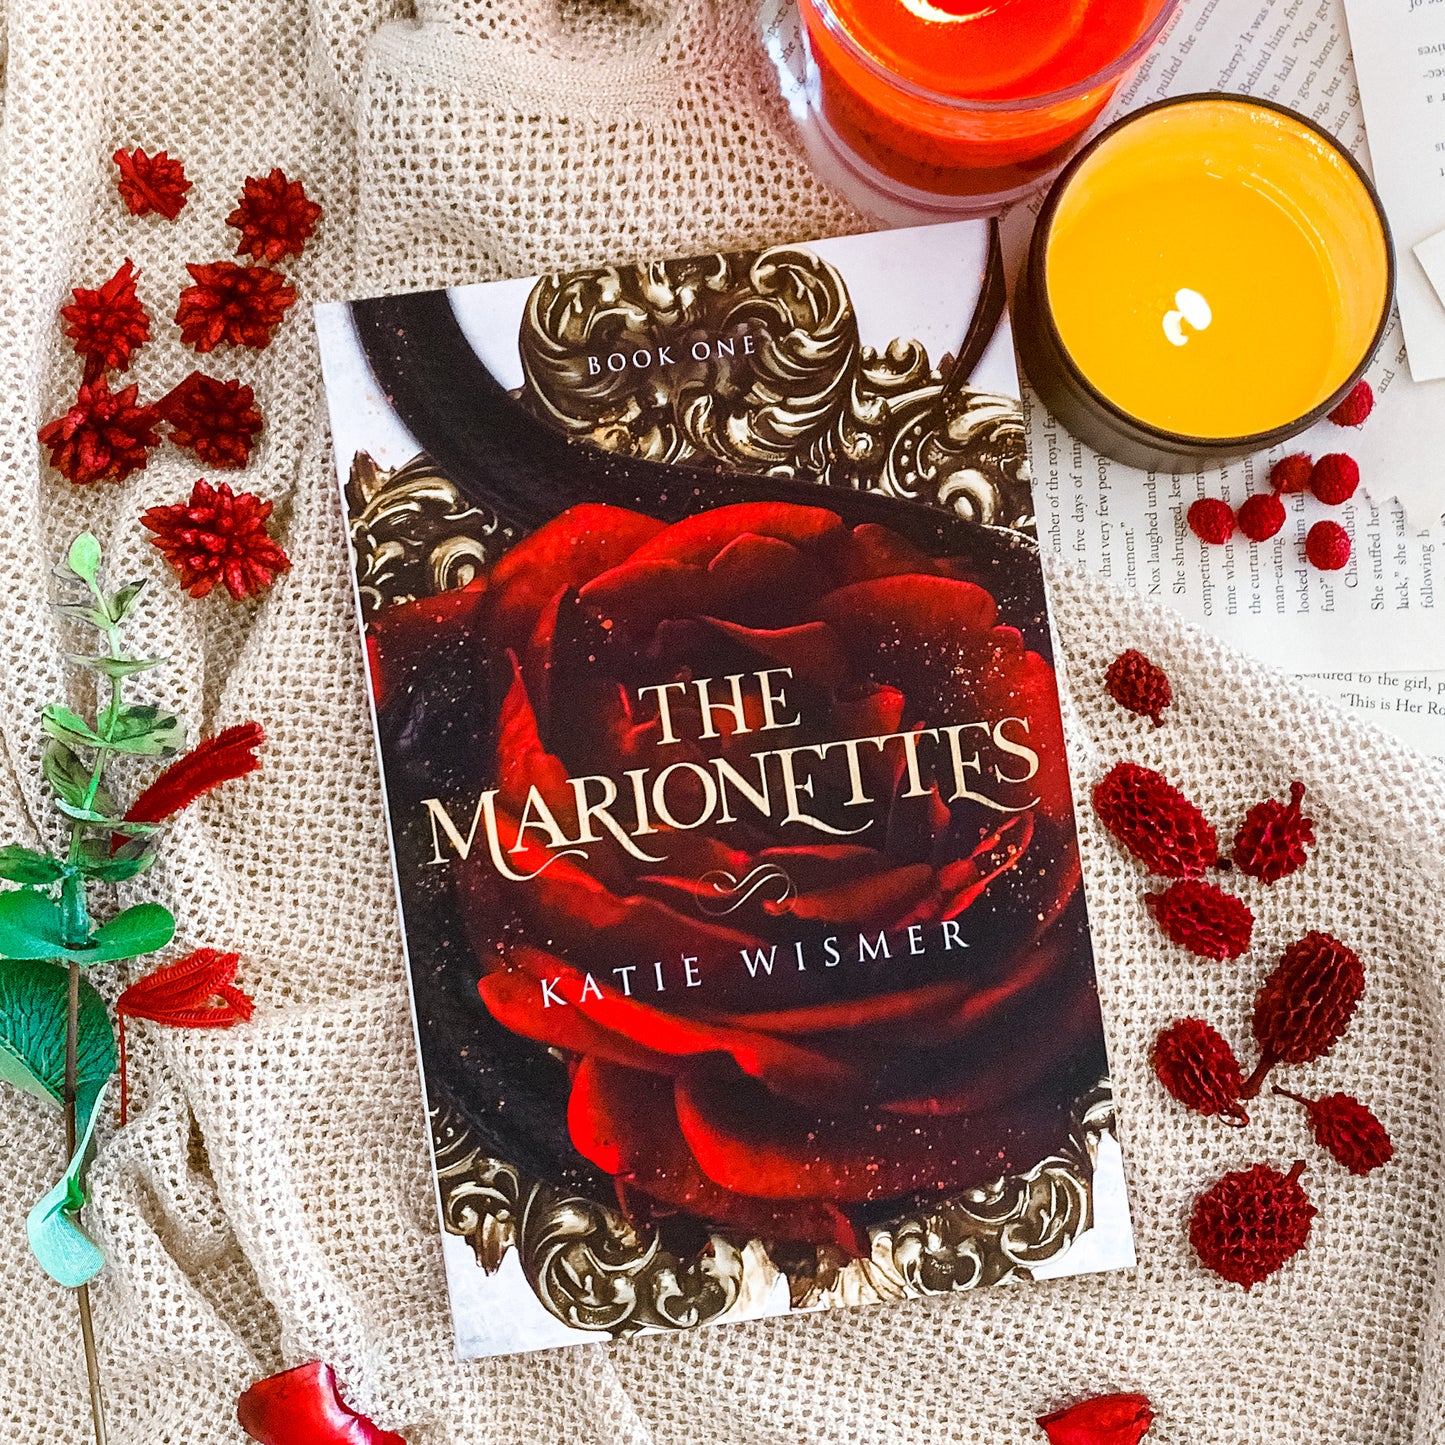 The Marionettes Series by Katie Wismer